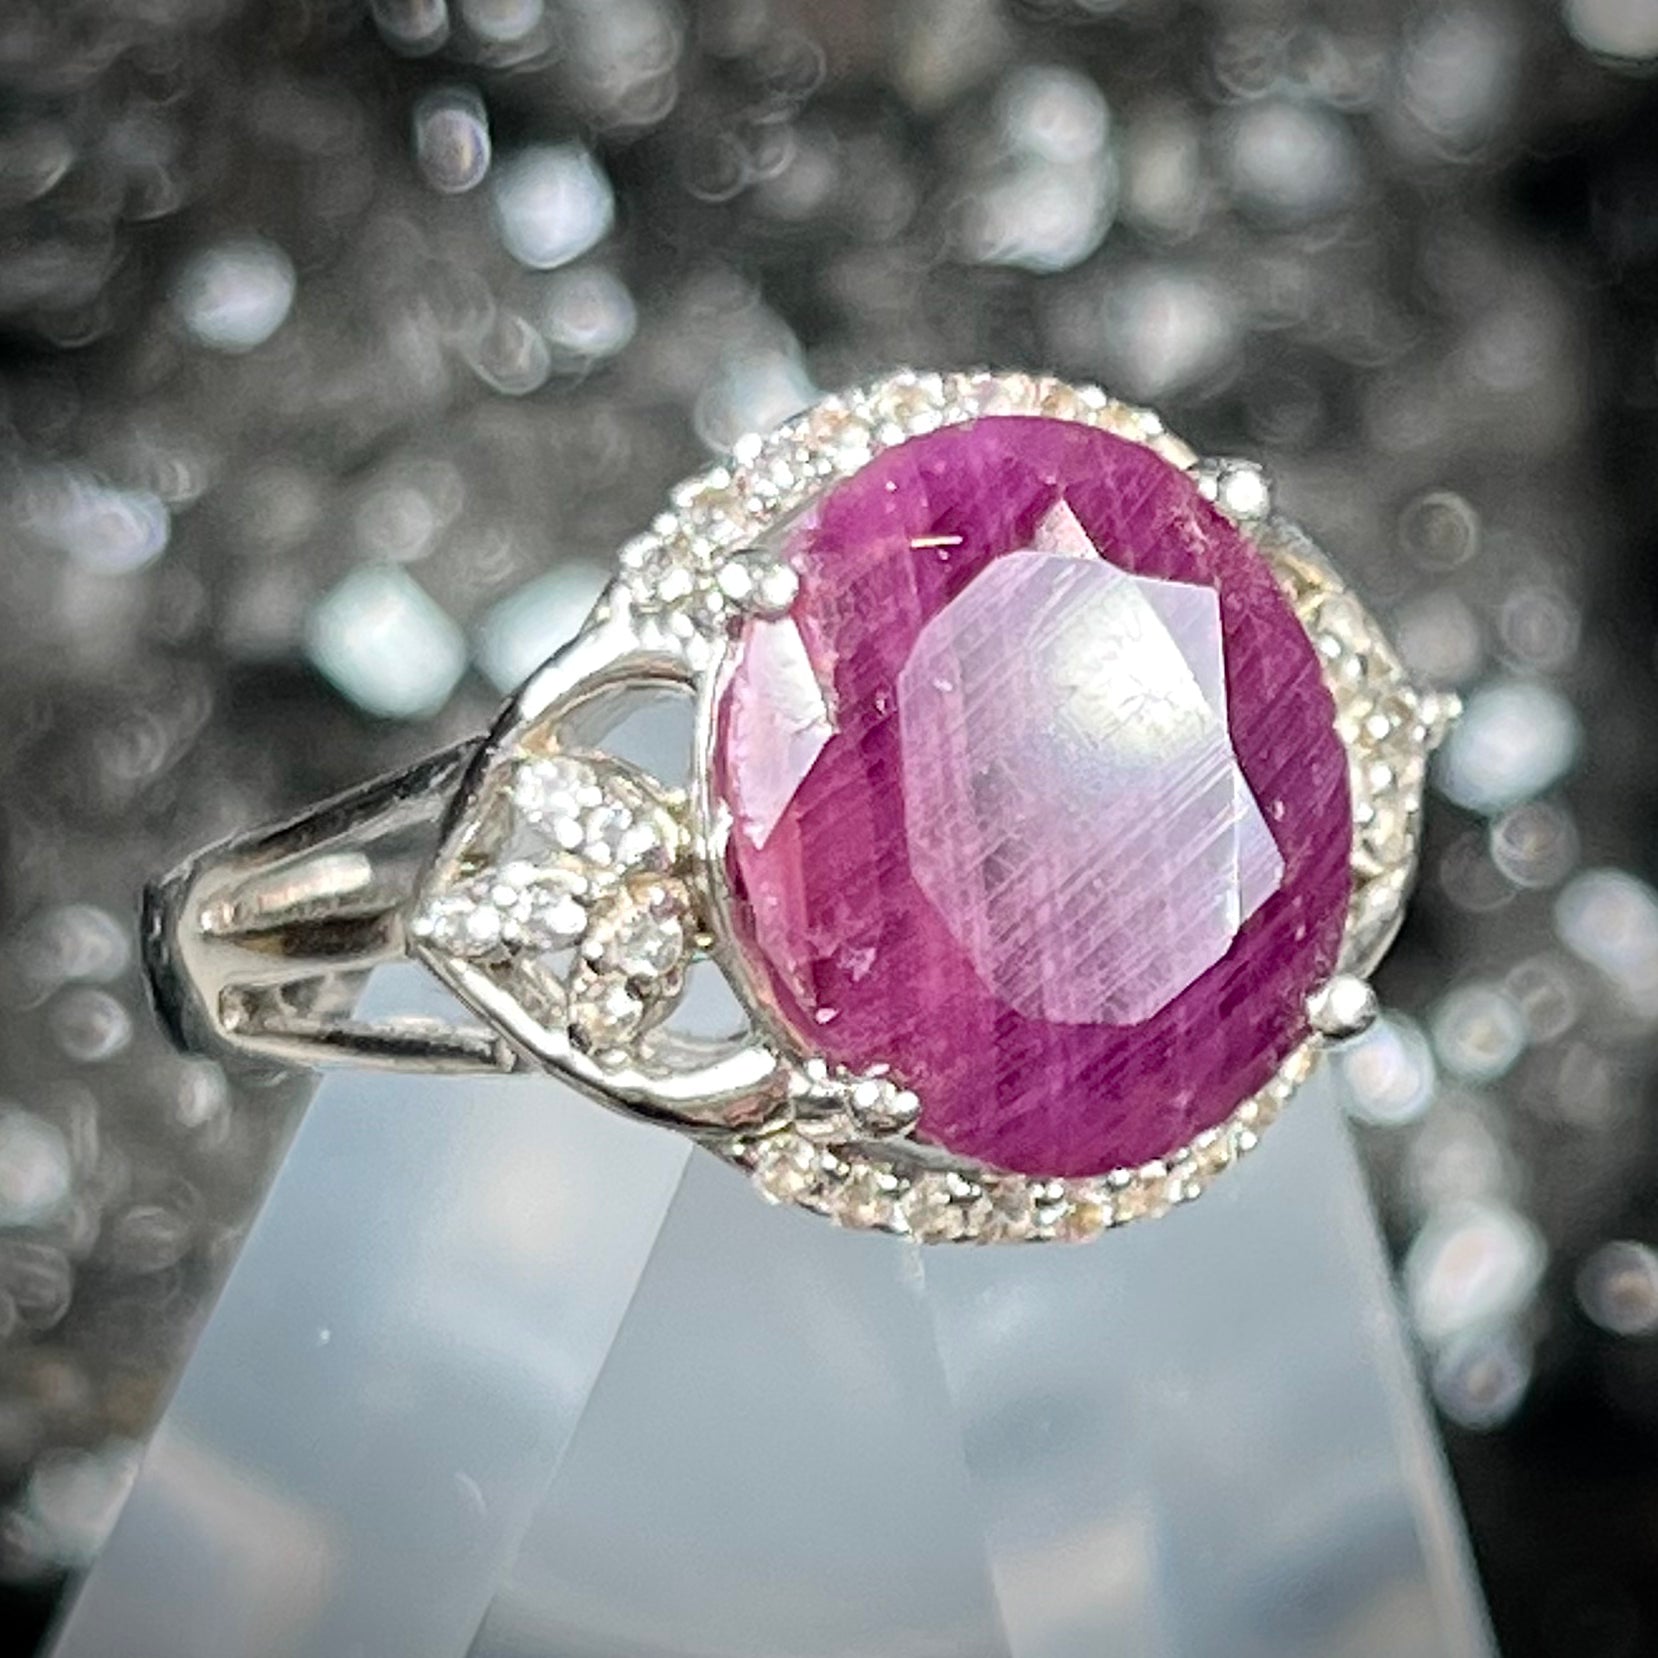 Natural Ruby & CZ Accent Ring | Burton's